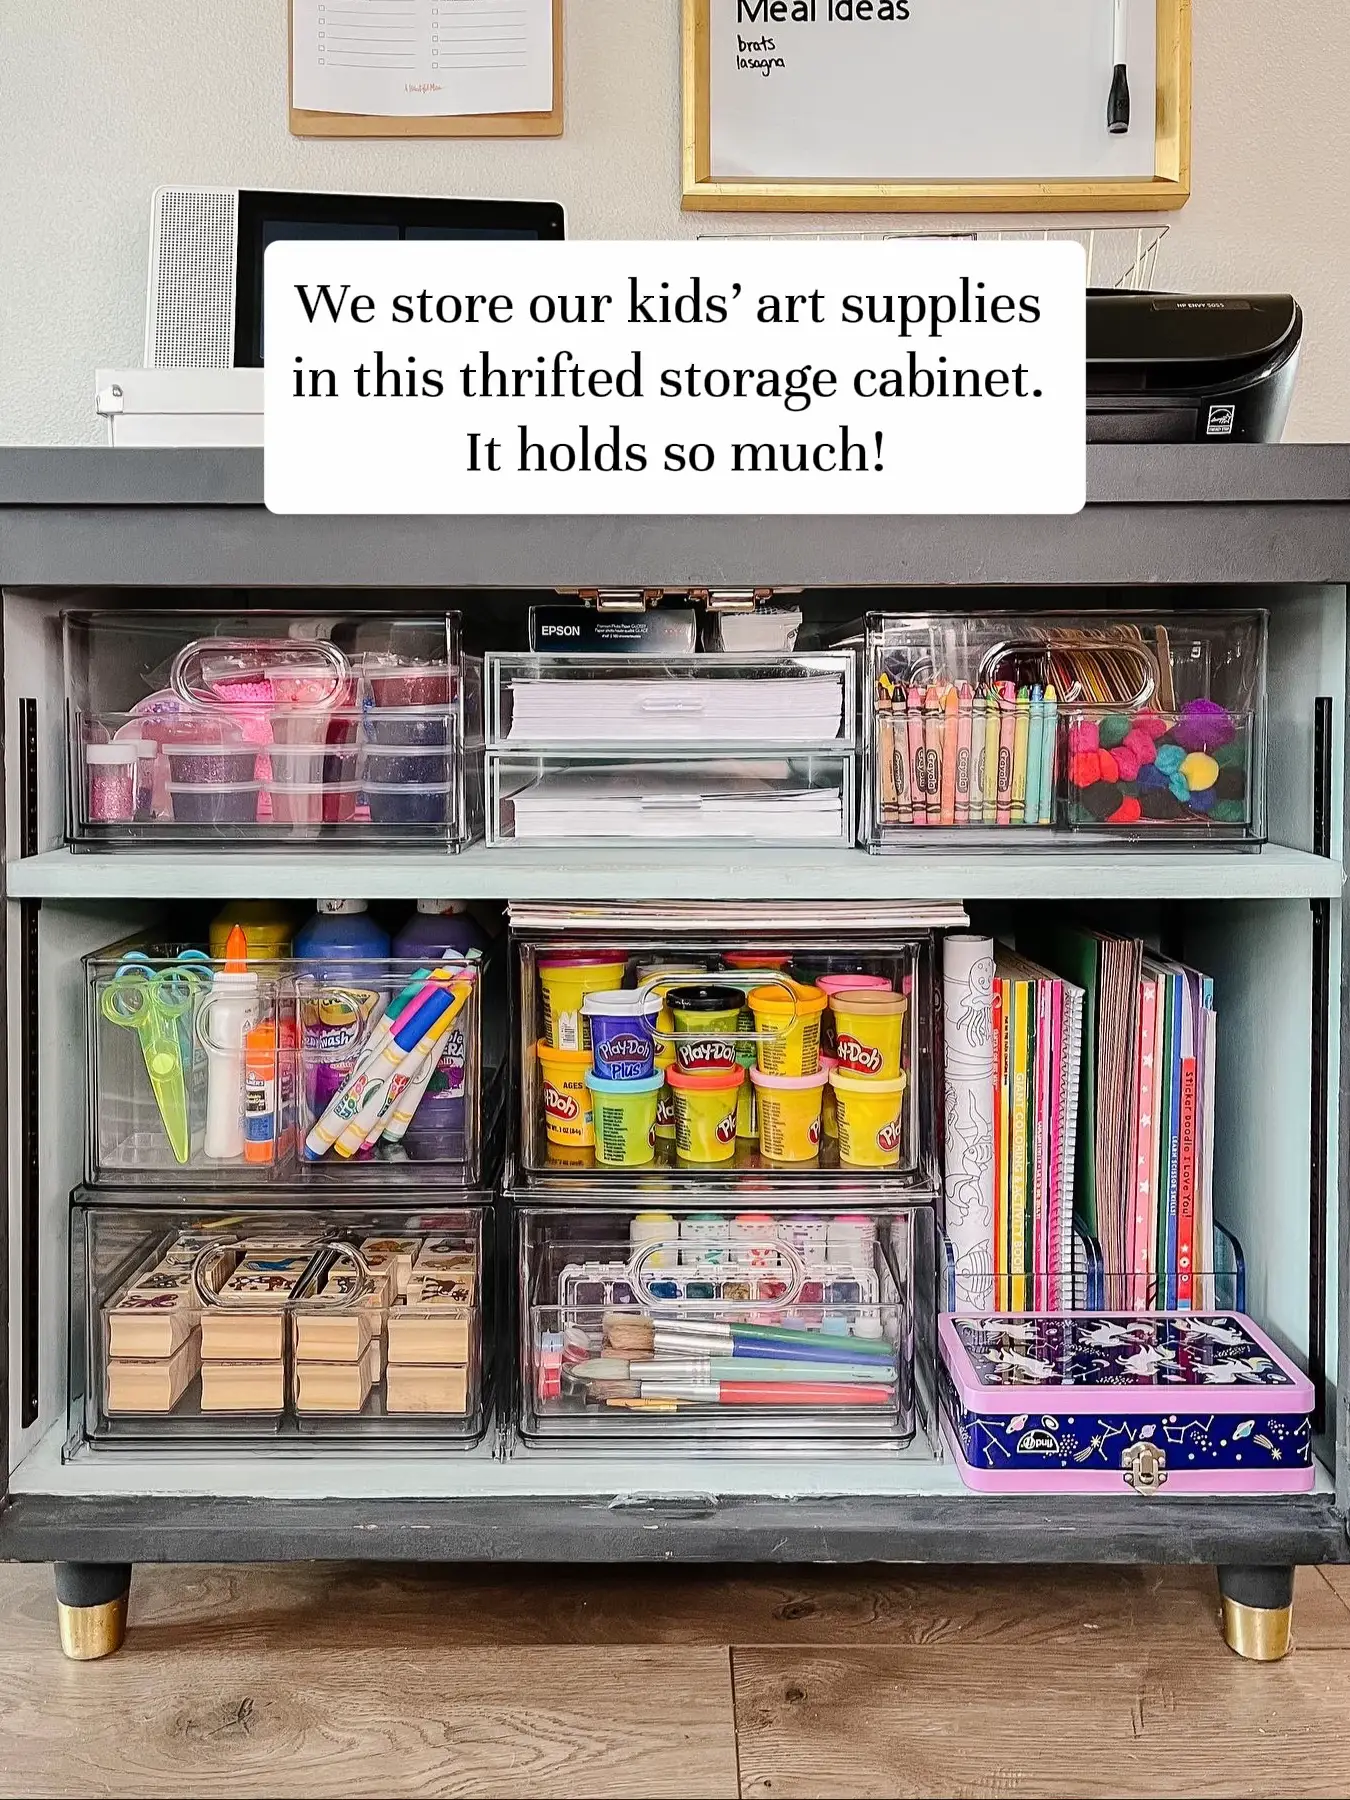 How to Organize Kids Art Supplies in a Small Space  Kids art supplies,  Kids craft supplies, Organization kids